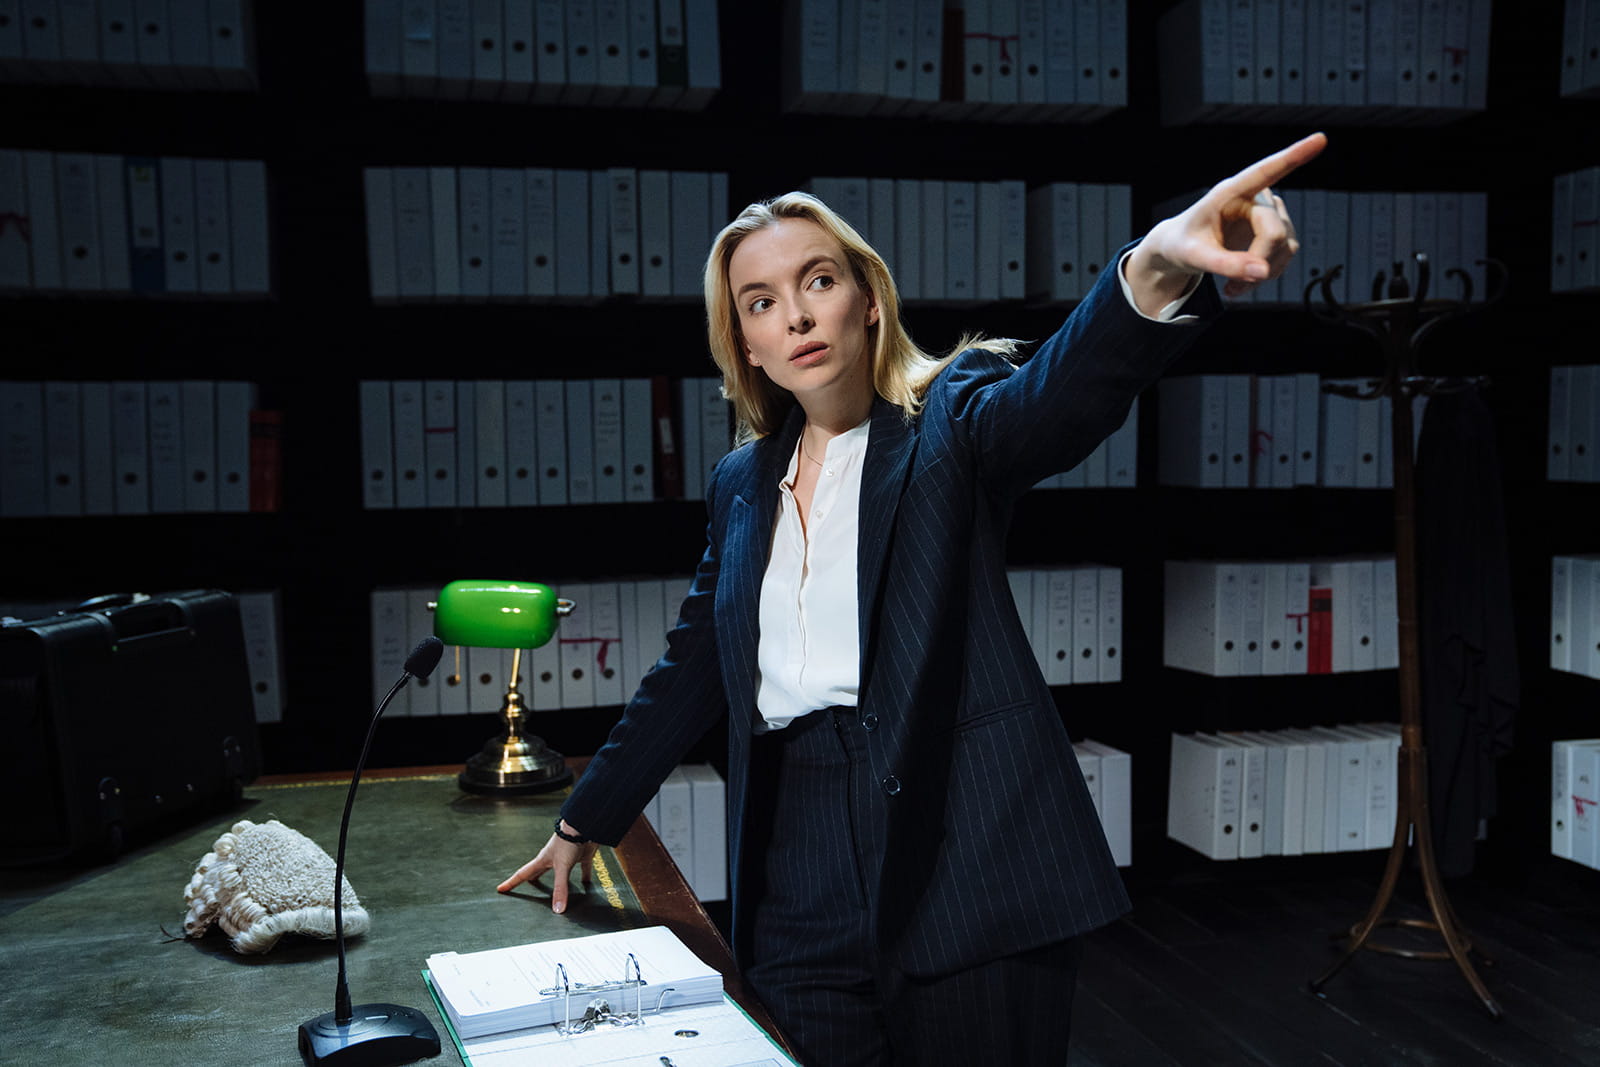 Jodie Comer as Tessa in Prima Facie. Tessa is dressed smartly in a suit, and is pointing off into the distance. Tessa's other hand is leaning against a green leather topped desk, and there are shelves of files behind her.